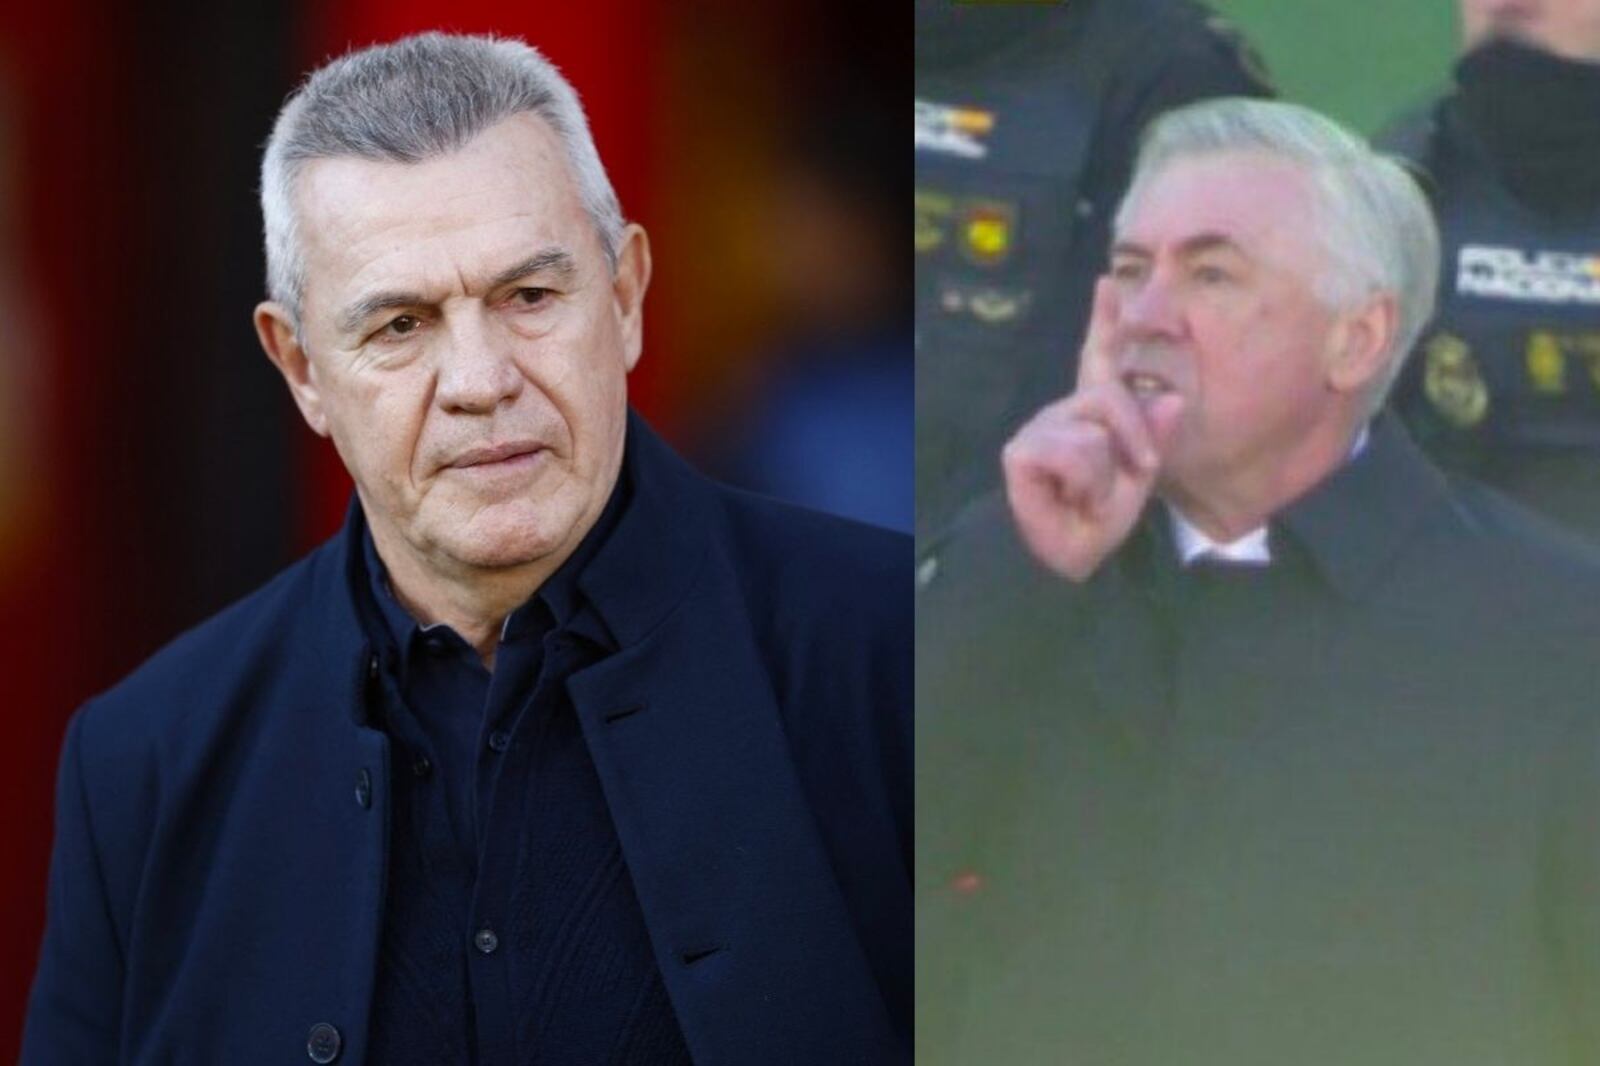 Carlo Ancelotti's unexpected reaction to seeing Javier Aguirre beat him